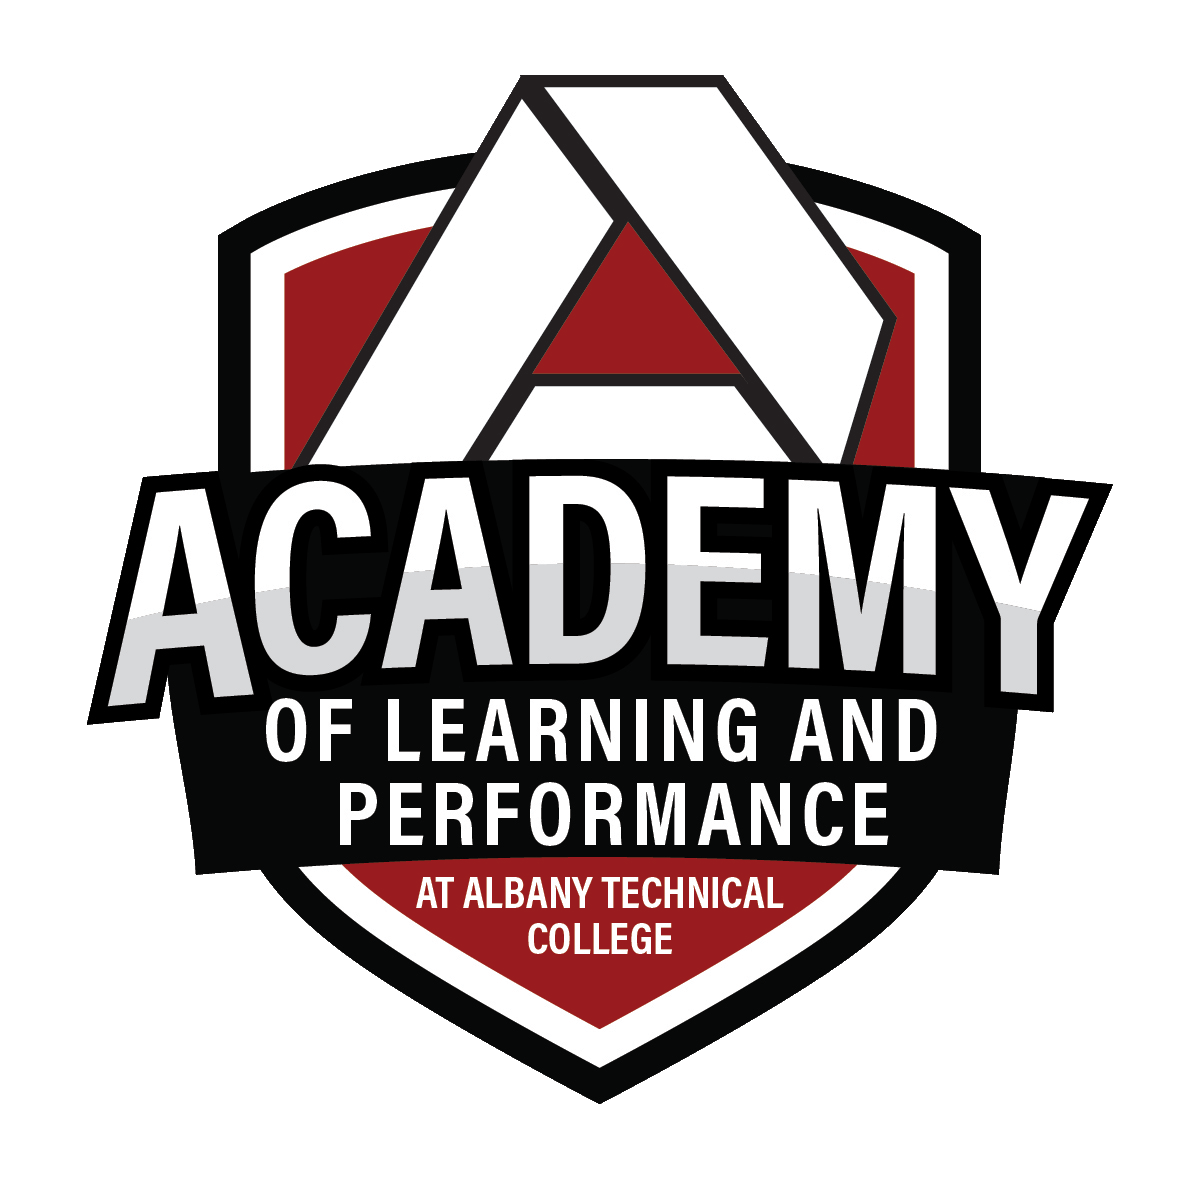 Albany Technical College Academy of Learning and Performance Logo.